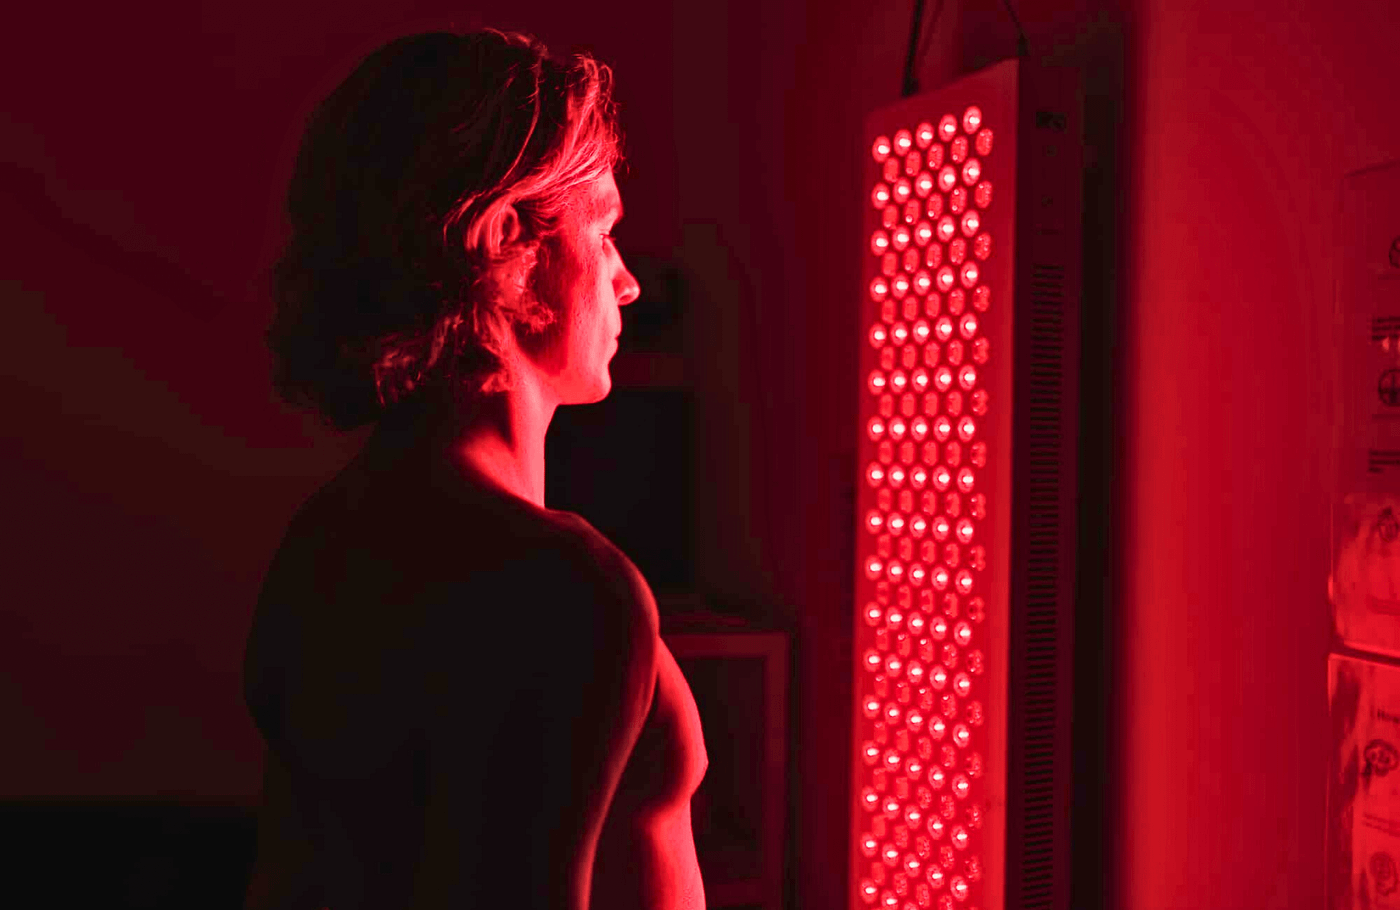 I Tried Red Light Therapy for 30 Days Straight. Here's What